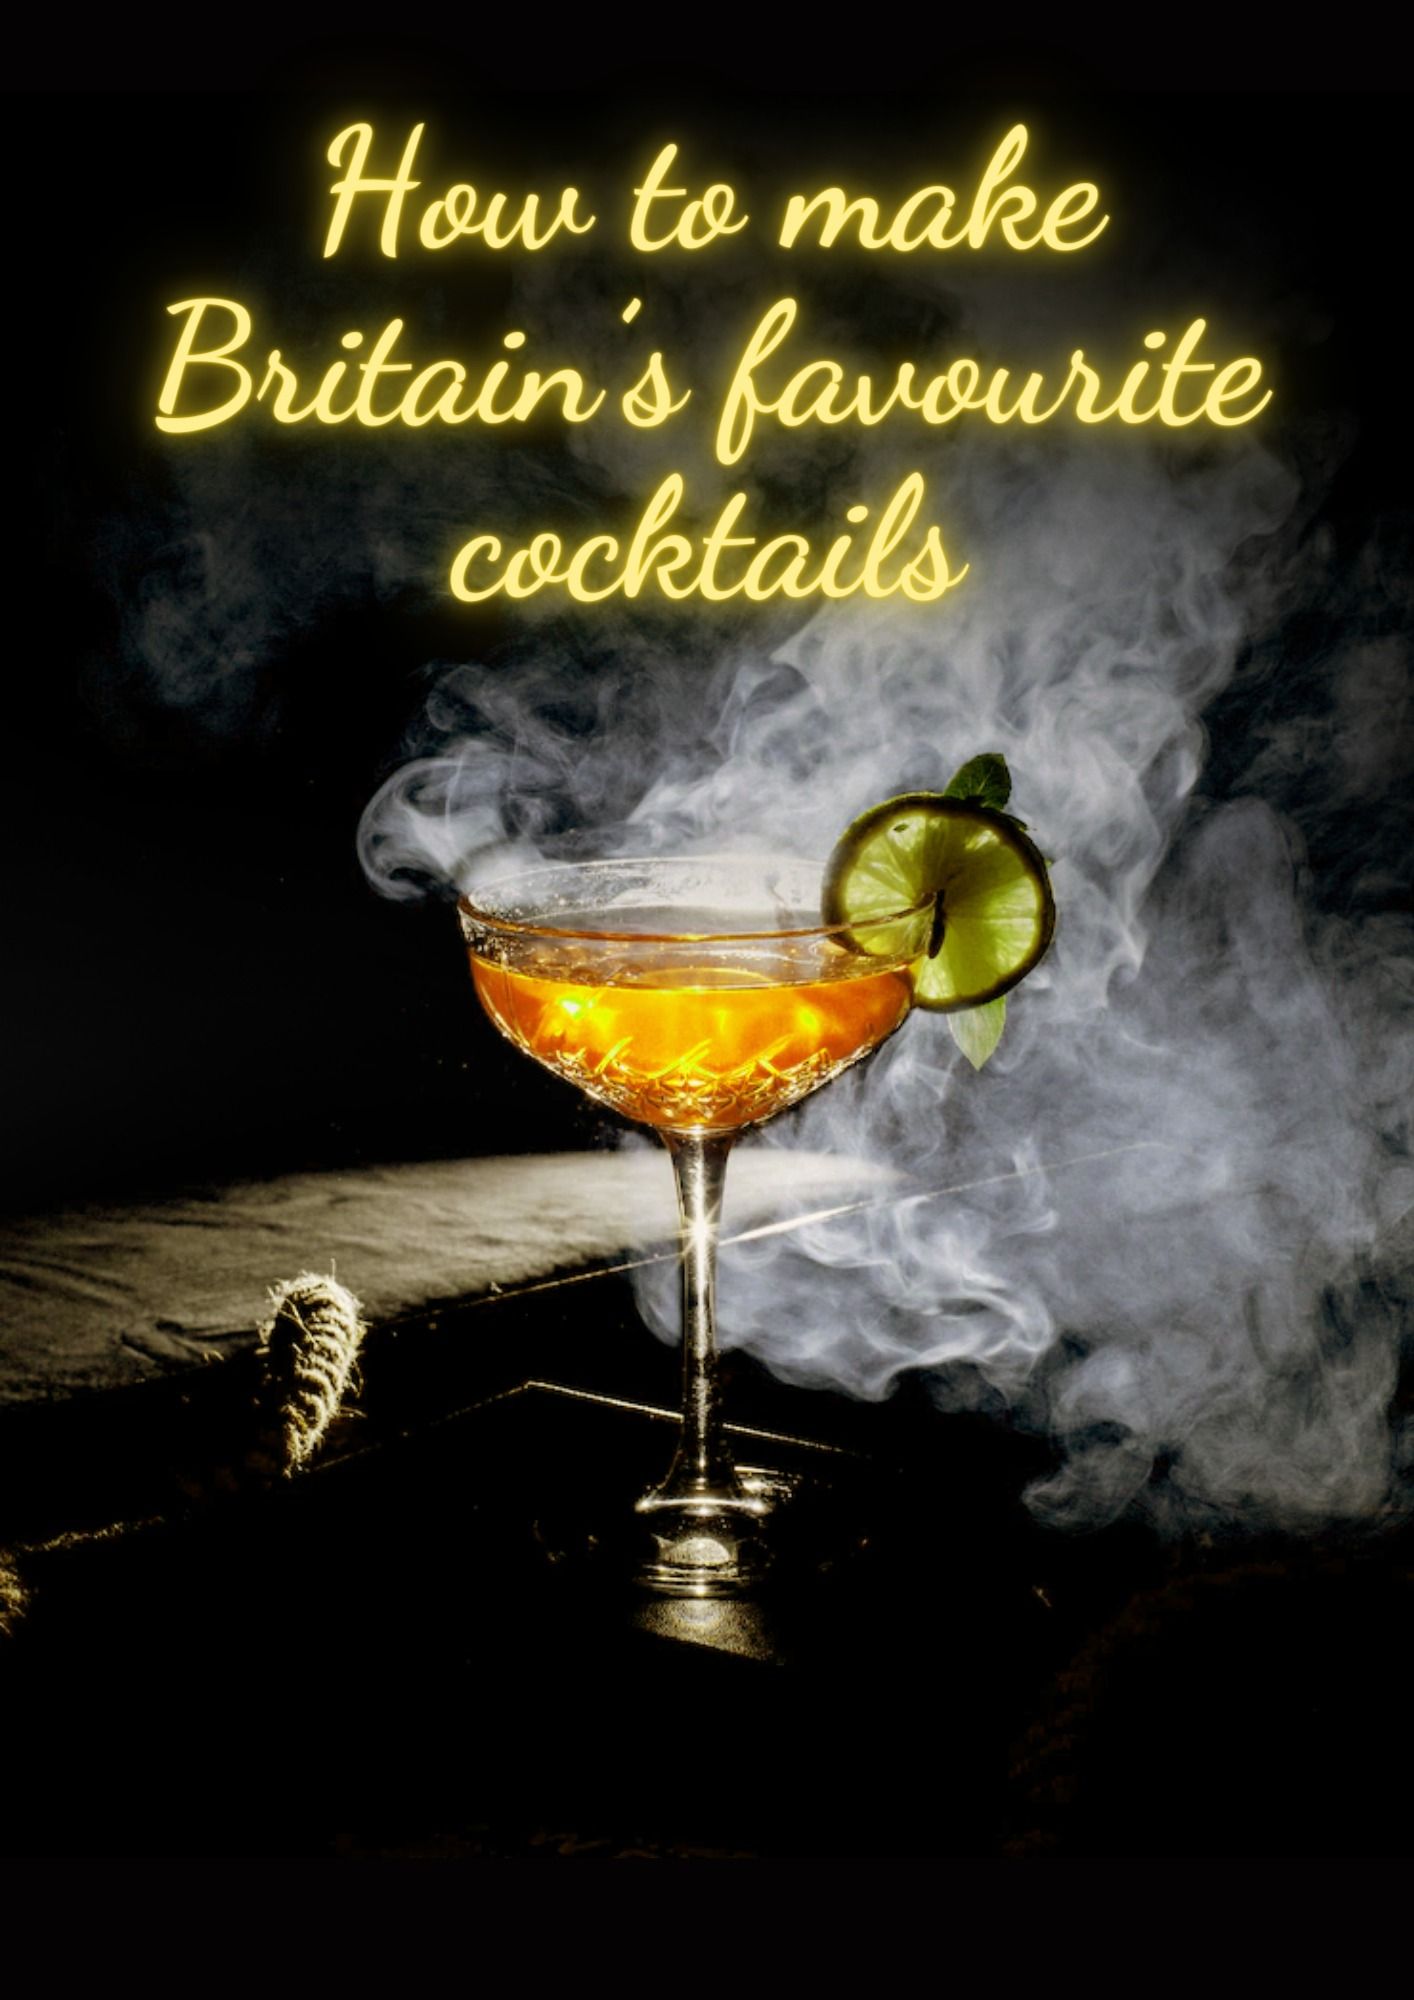 How to make Britain’s favourite cocktails